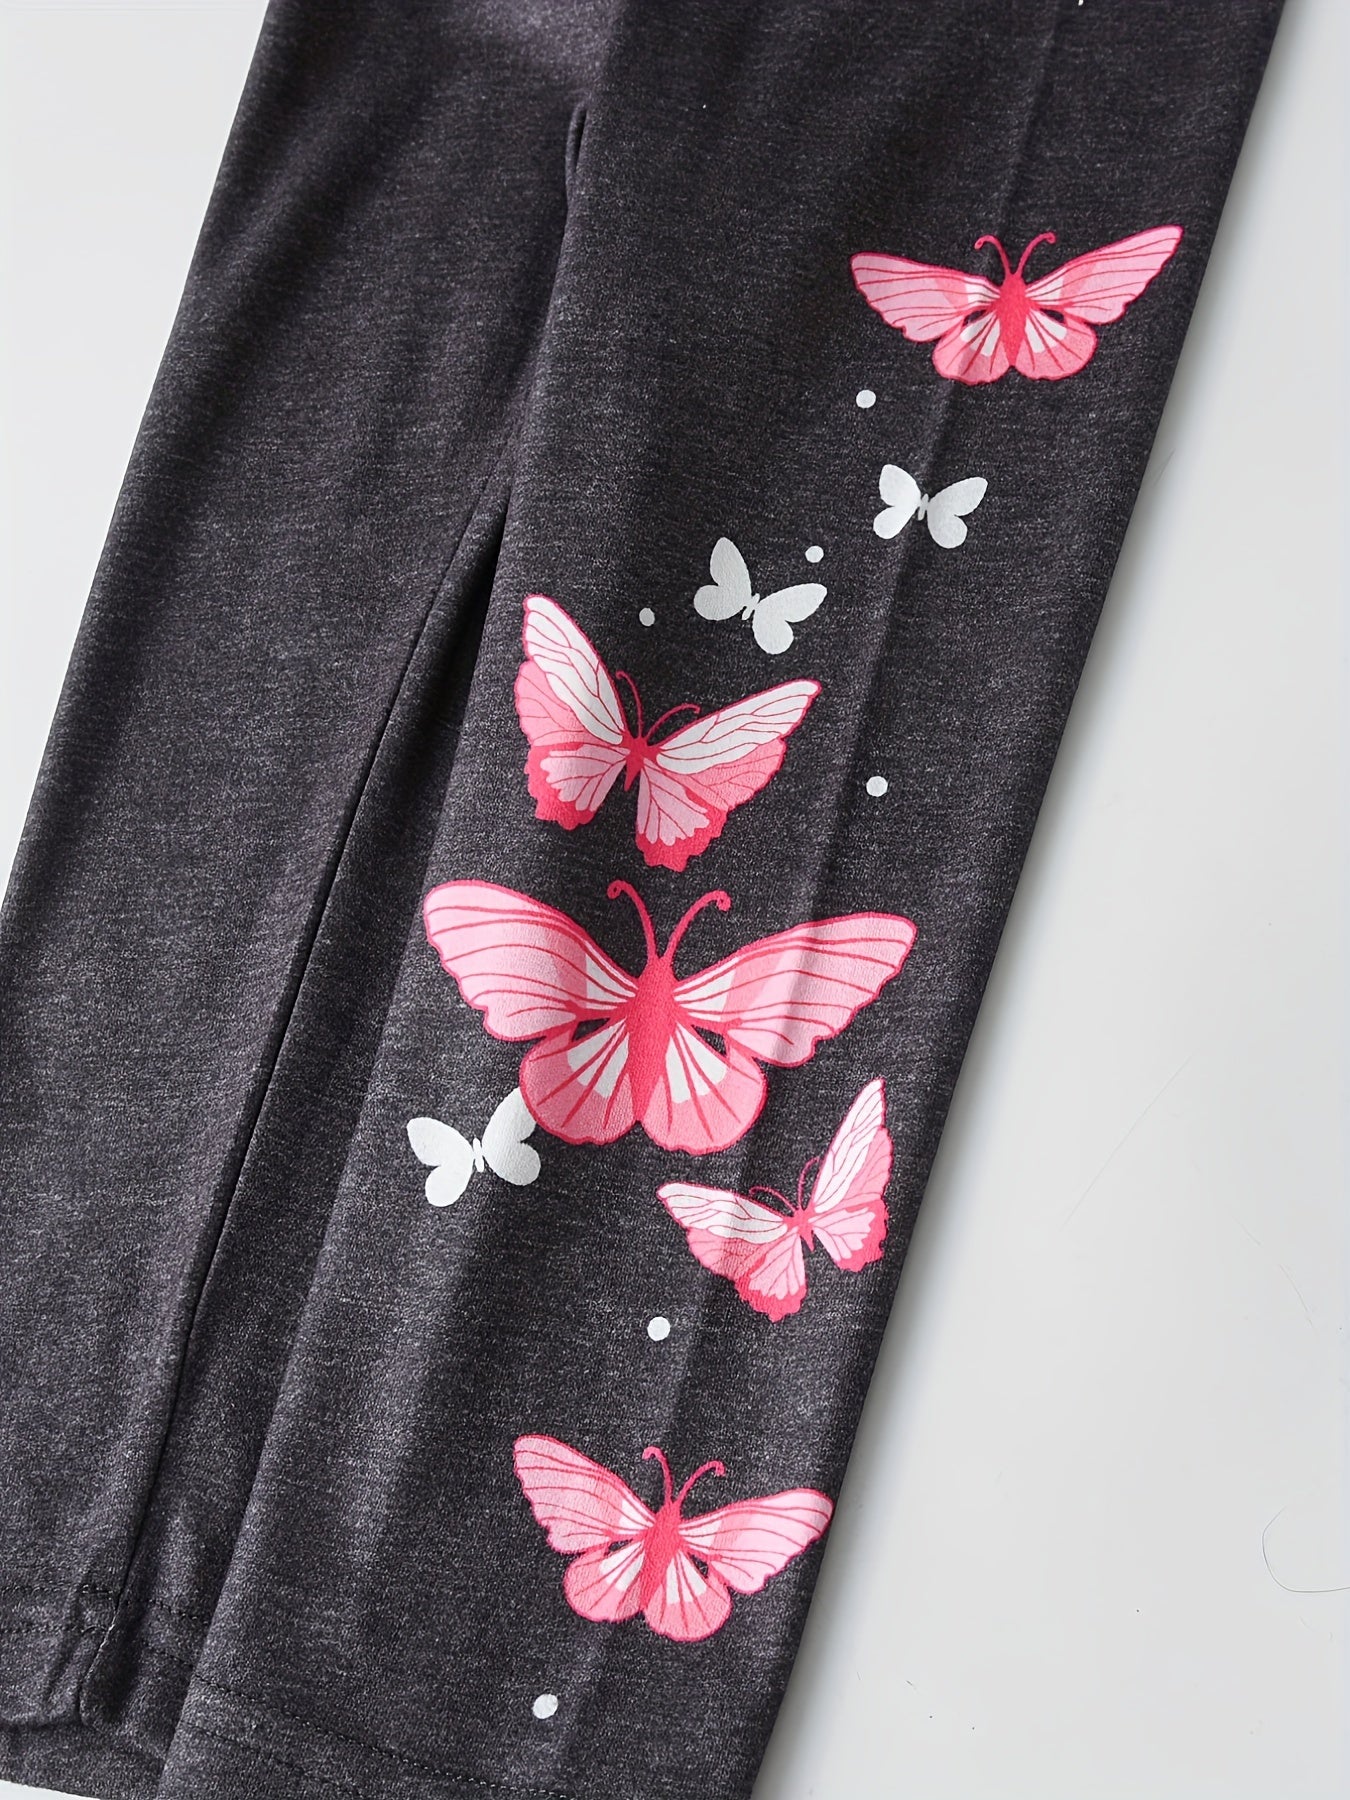 Girls Butterfly Graphic Leggings Slim Stretch For Spring/autumn